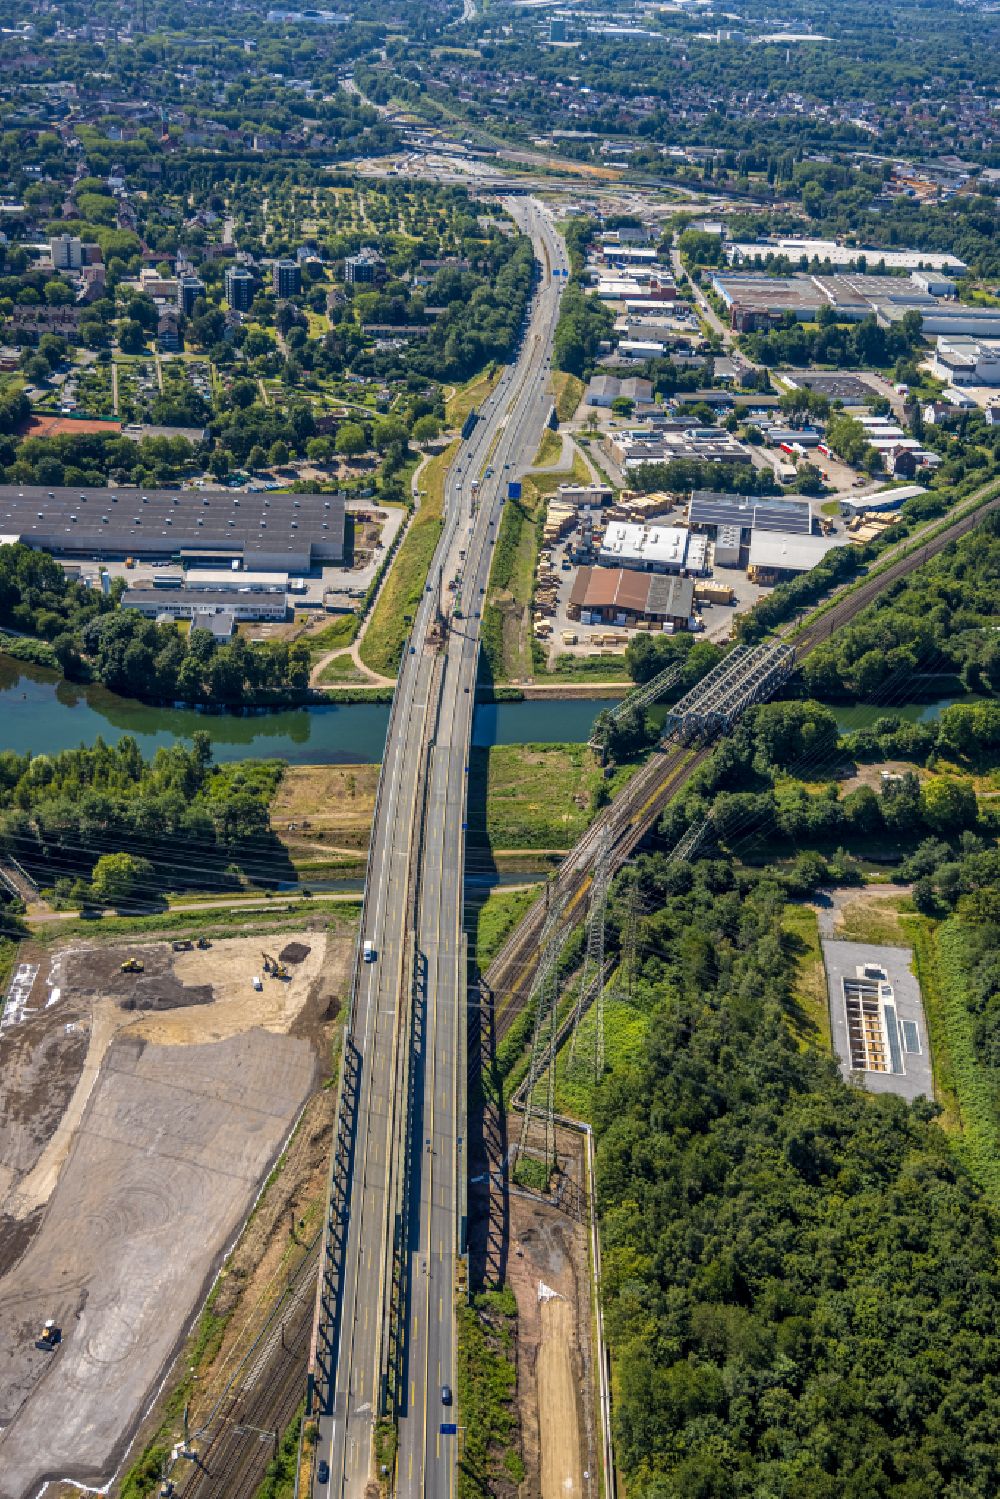 Recklinghausen from the bird's eye view: Motorway construction site for the expansion and extension of track along the route of A43 in Recklinghausen at Ruhrgebiet in the state North Rhine-Westphalia, Germany